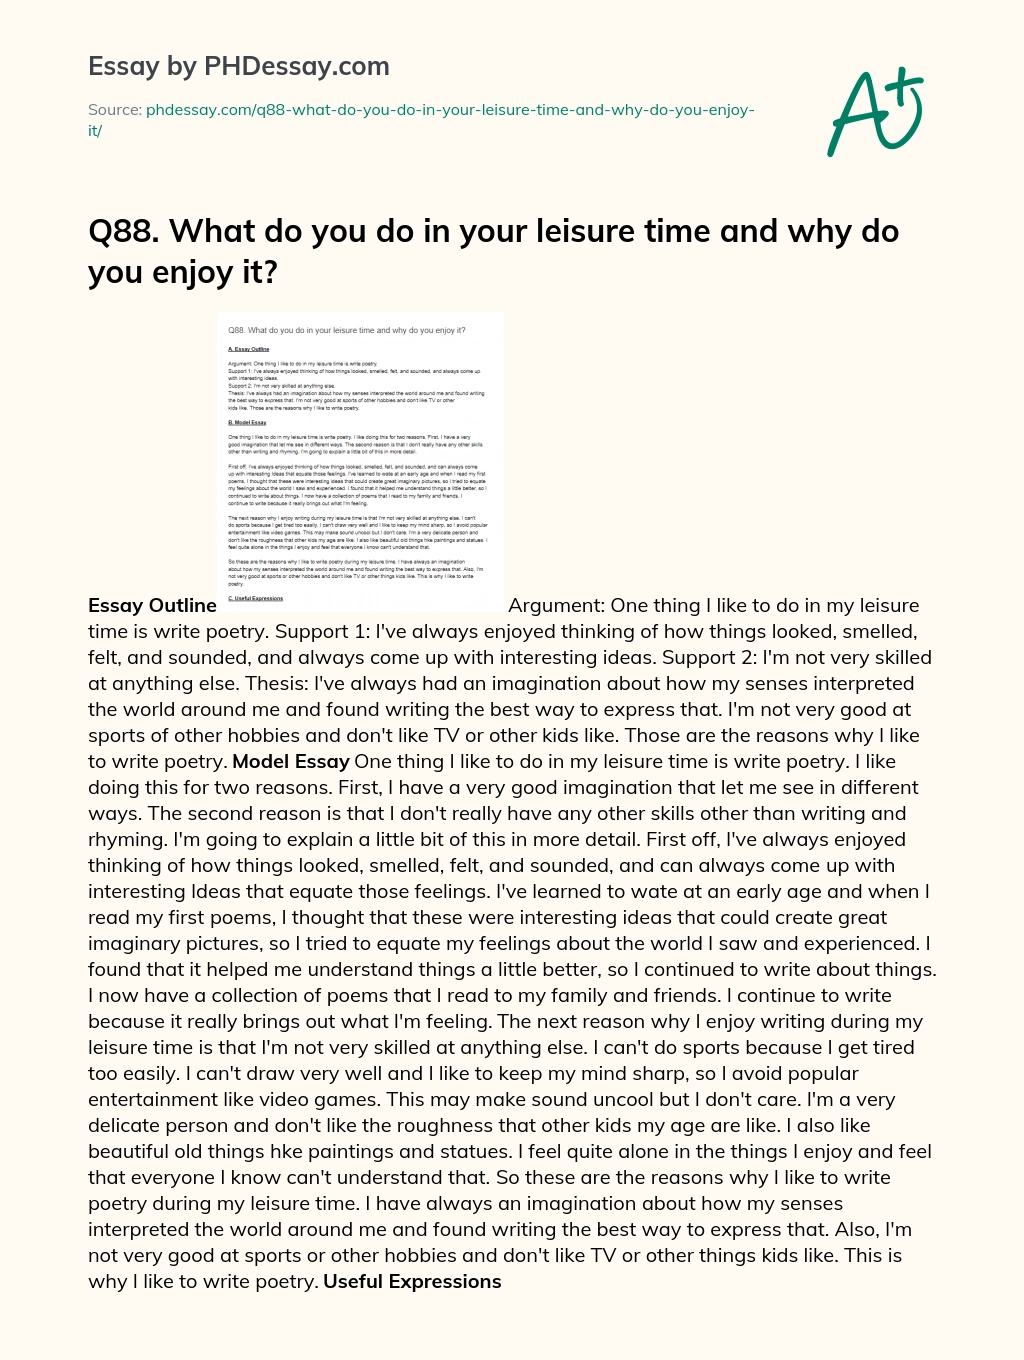 Q88. What do you do in your leisure time and why do you enjoy it? essay